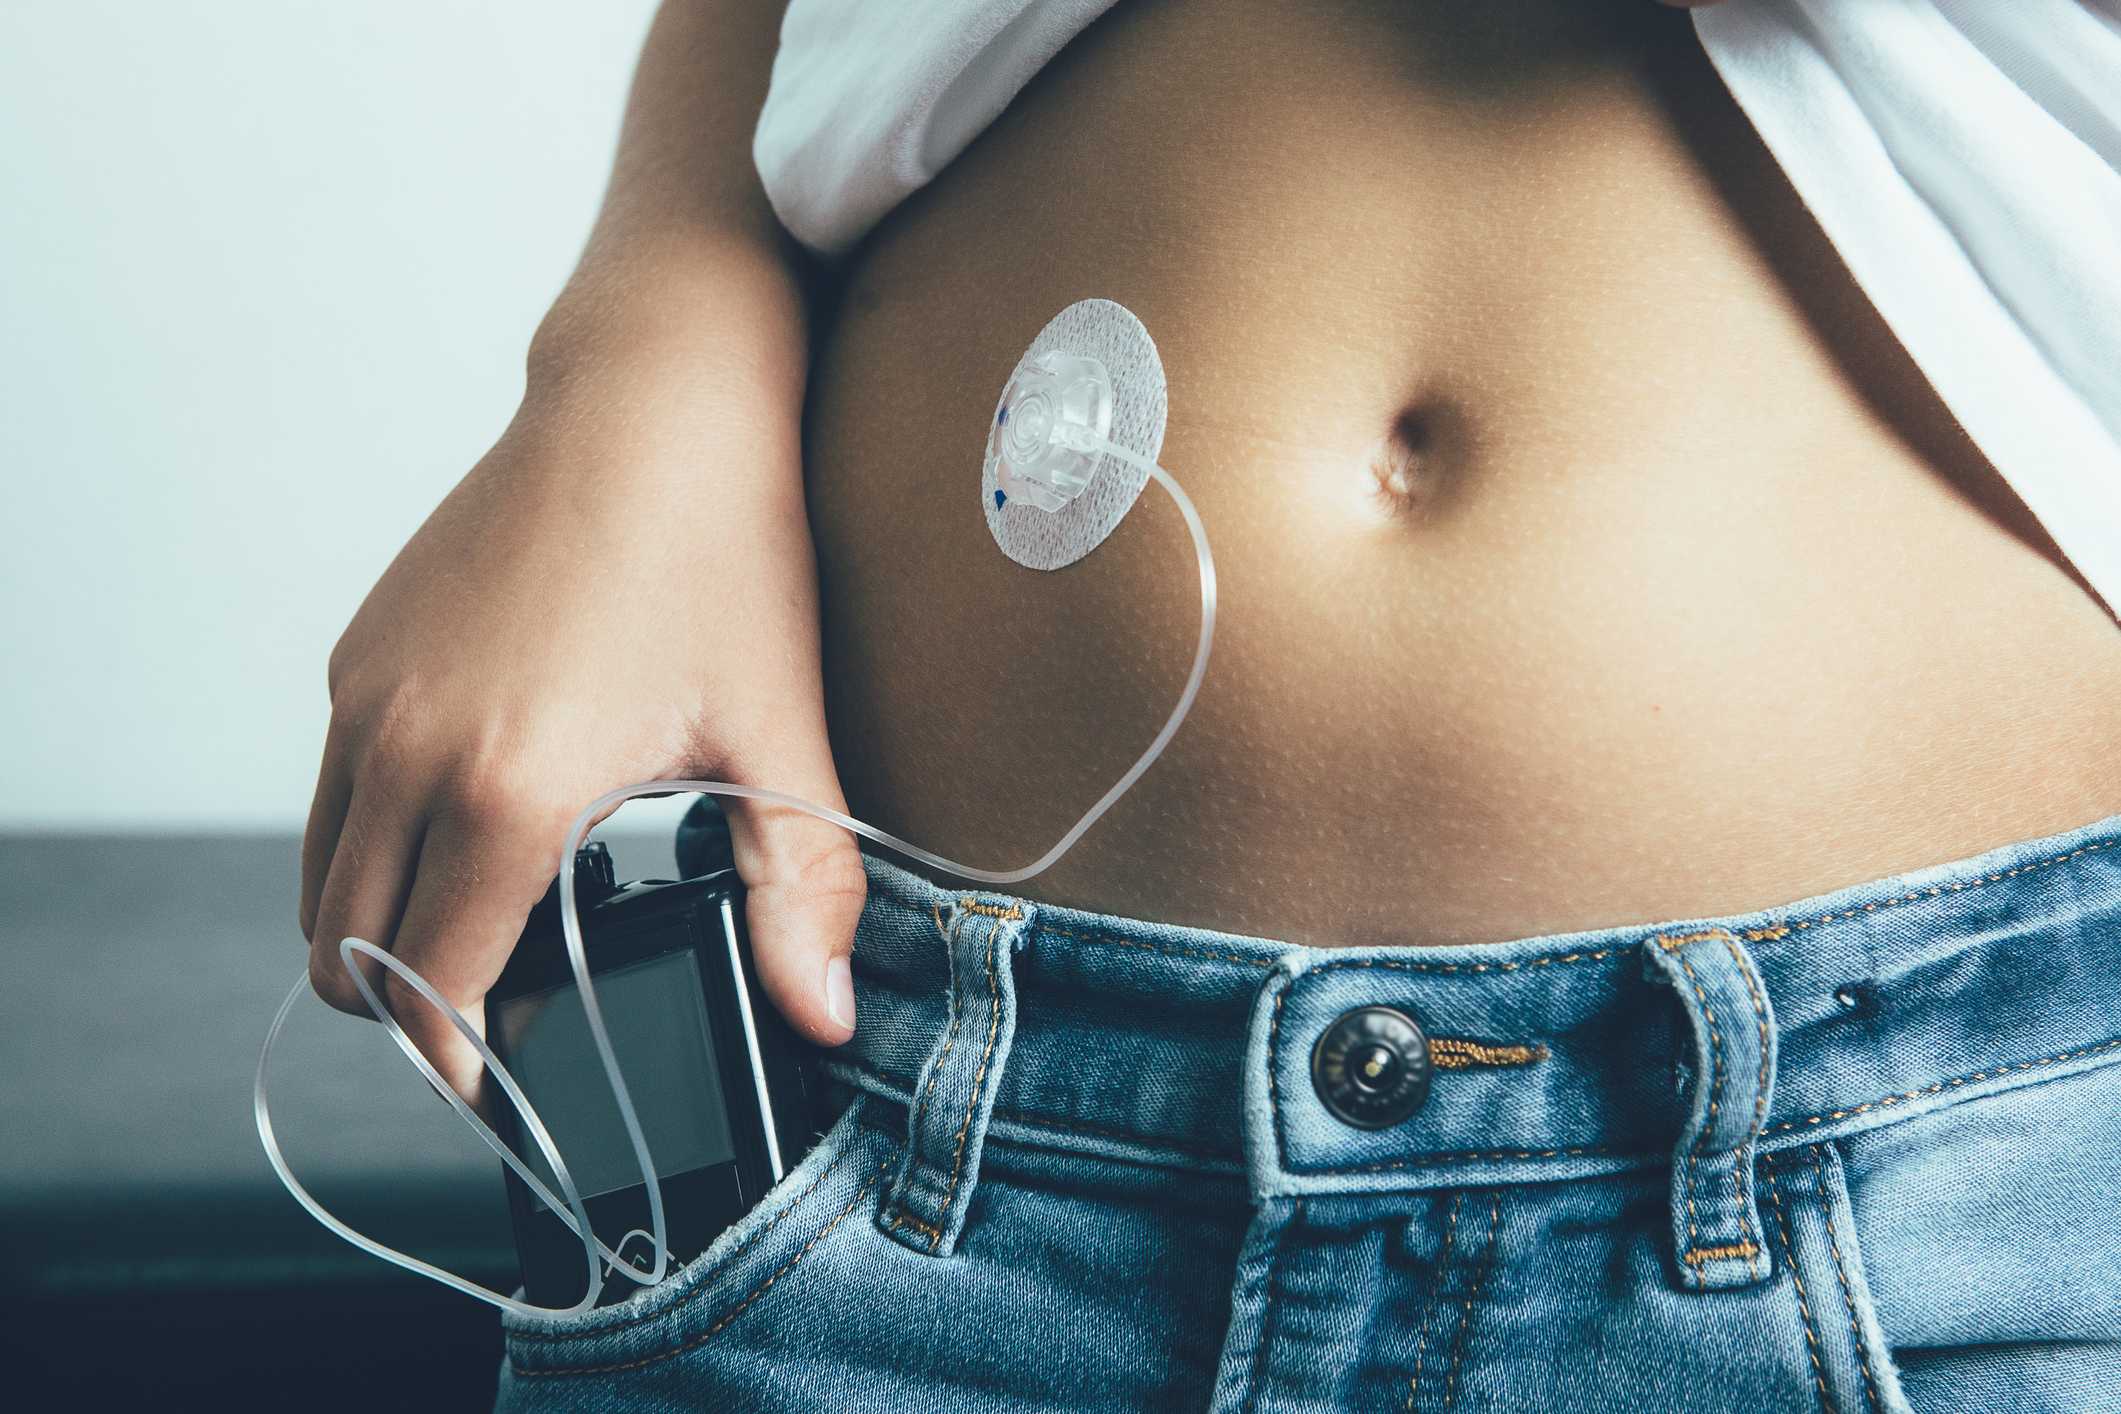 How to Use an Insulin Pump